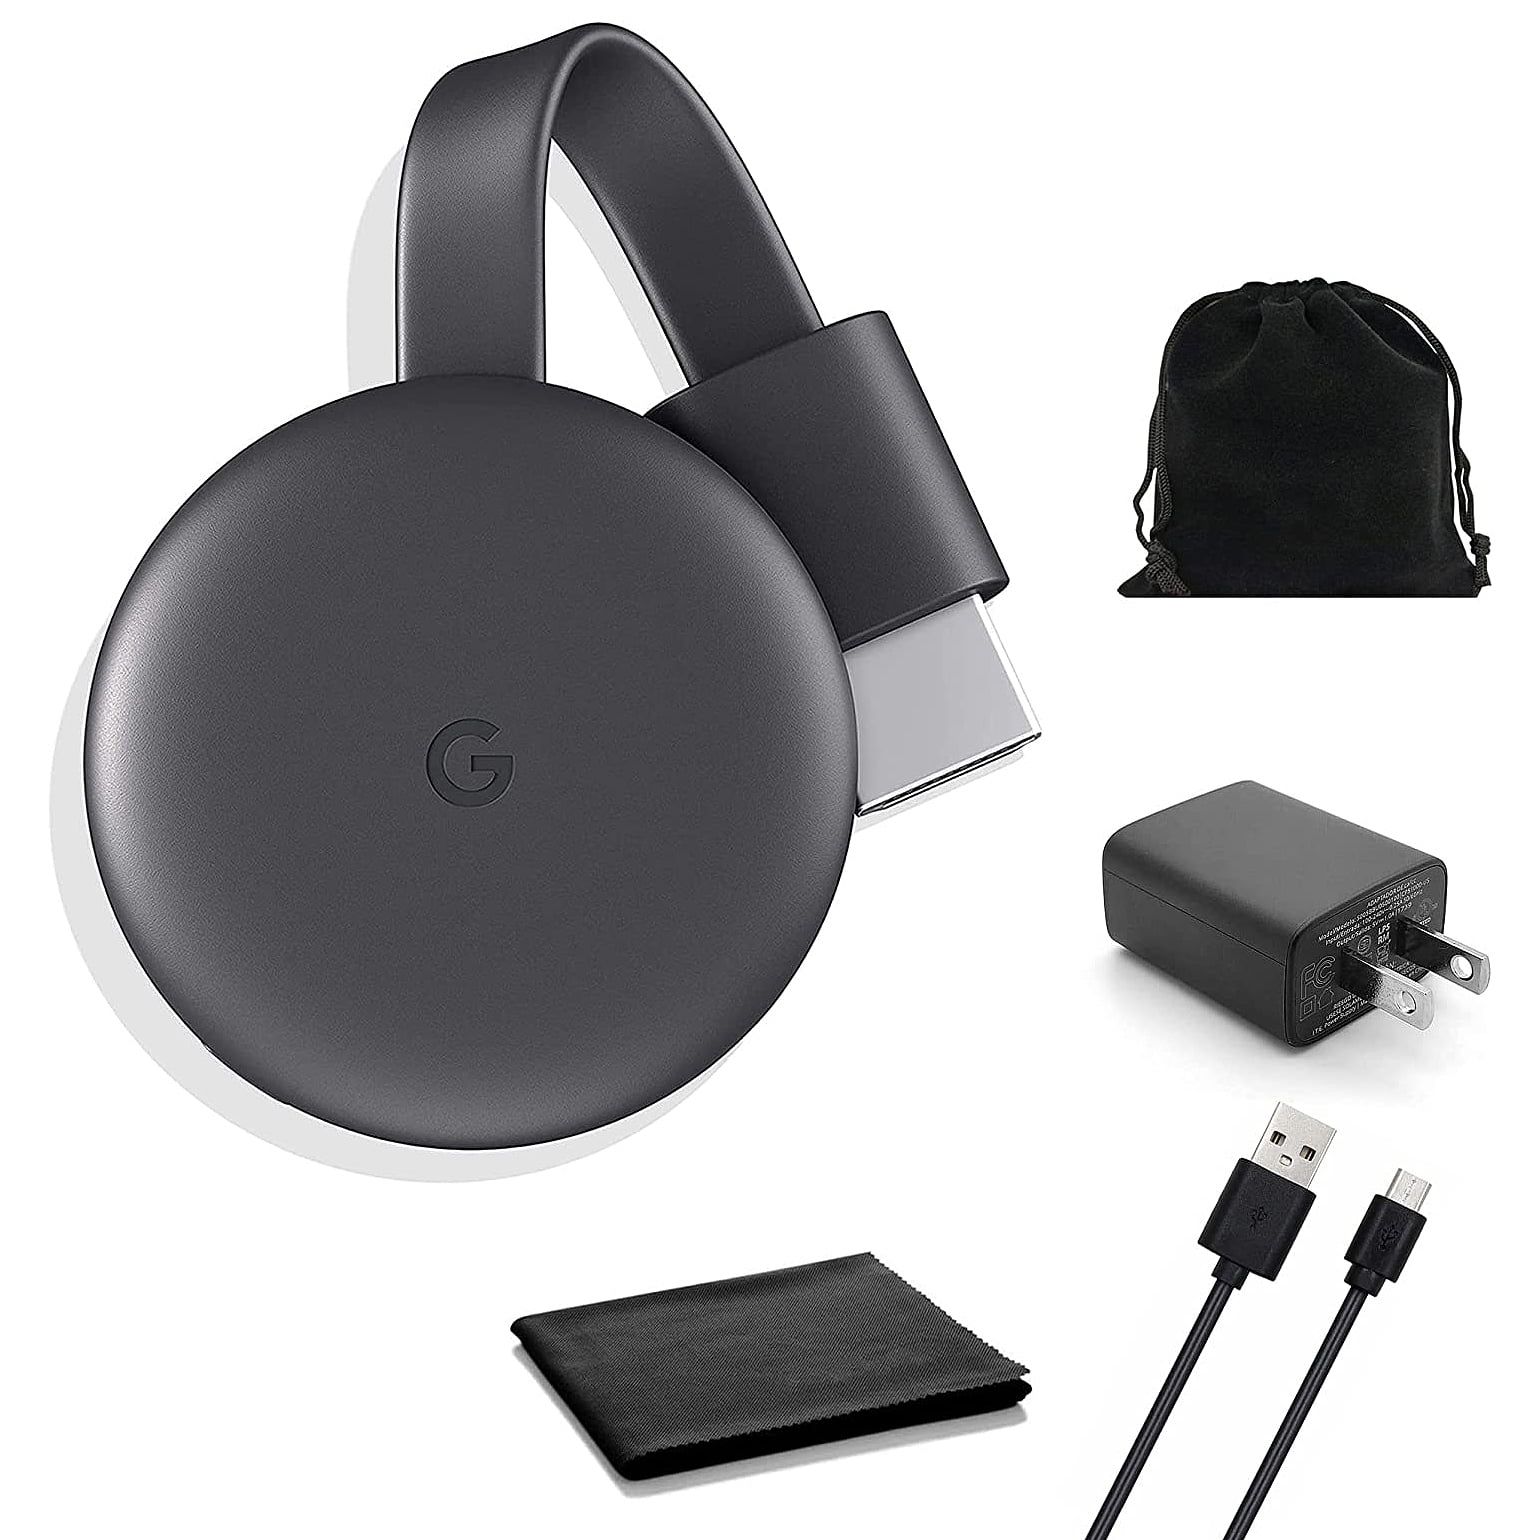 Forstærker bassin salvie Google Chromecast 3rd Gen - Streaming Device with HDMI Cable - Stream  Shows, Music, Photos, and Sports from Your Phone to Your TV - with  Microfiber Cloth and Travel Carrying Pouch - Walmart.com